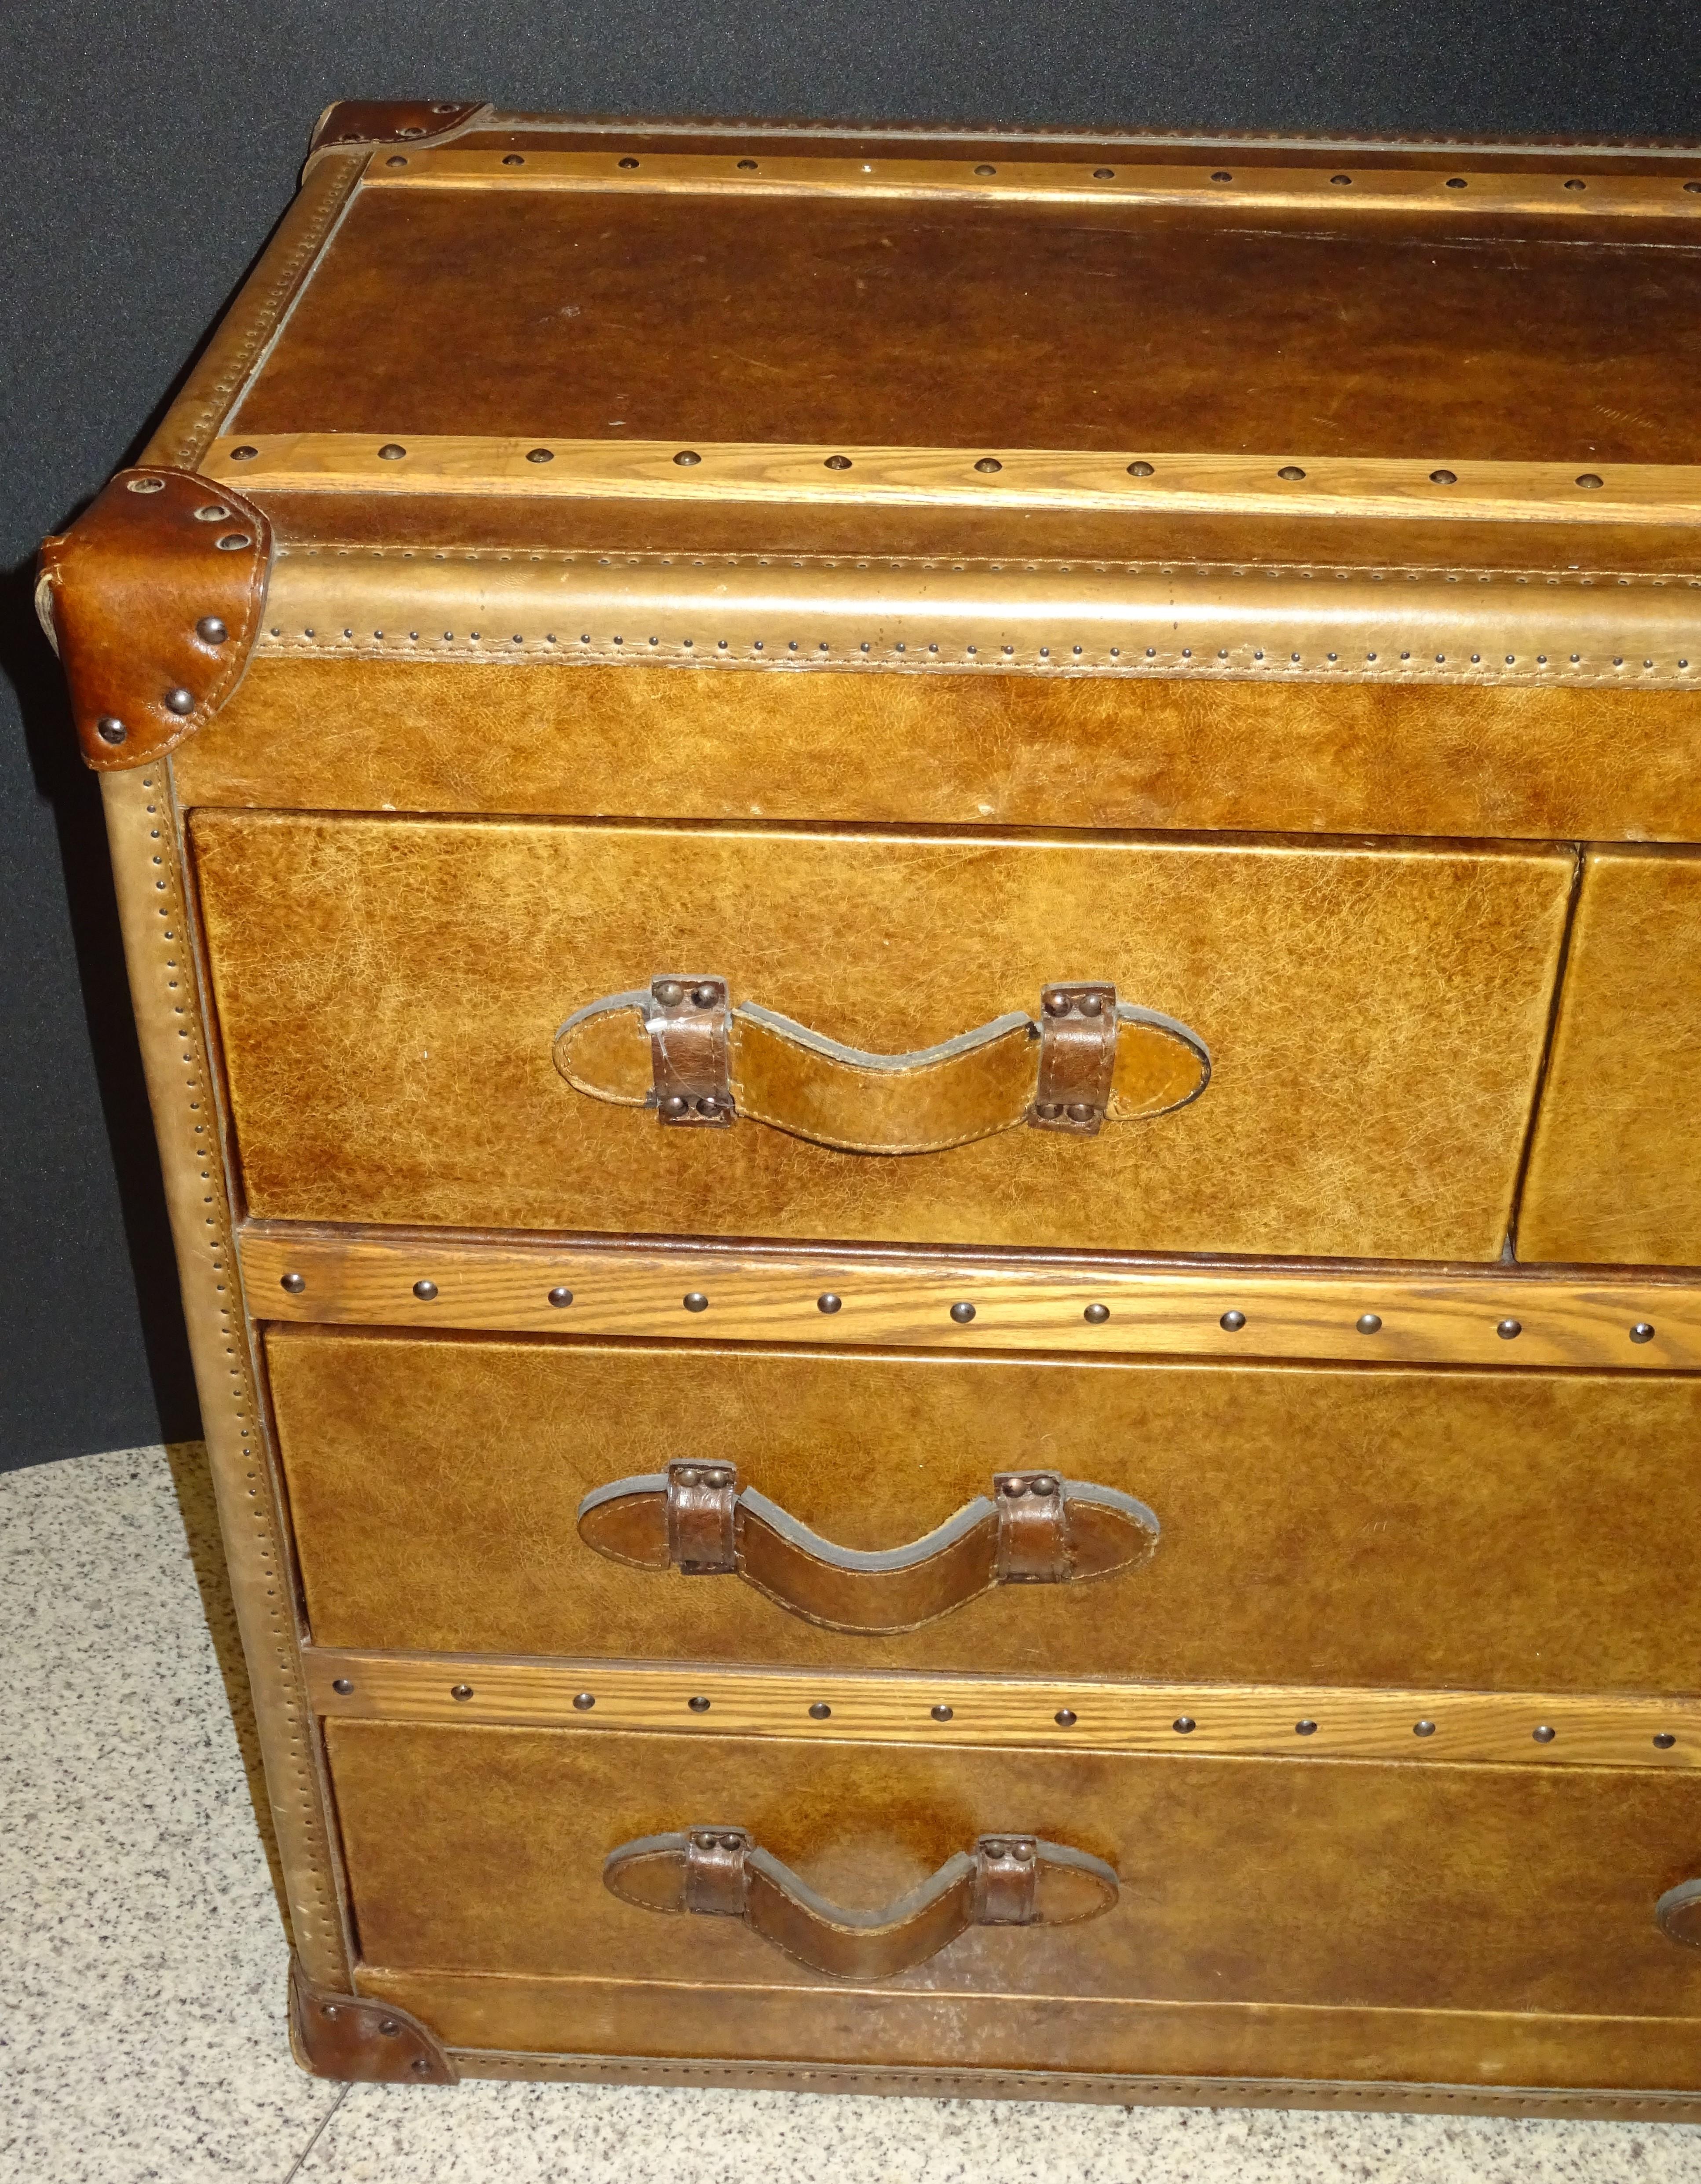 British Colonial 21st Century Flamant French Brown Leather and Wood Trunk Chest of Drawers